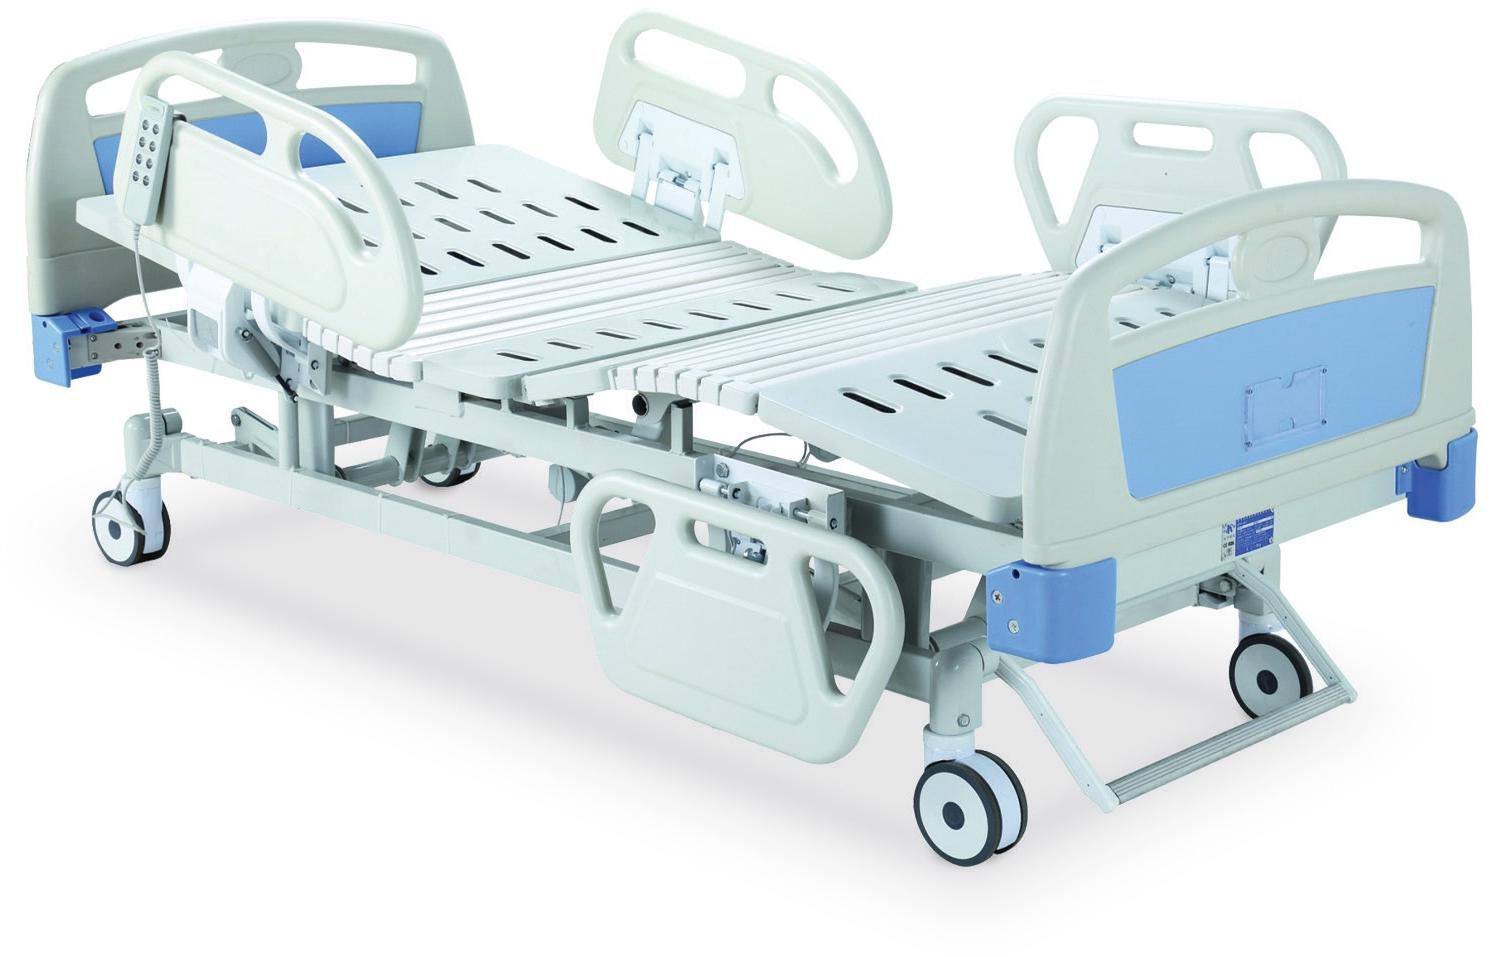 Three Function Electric Icu Bed